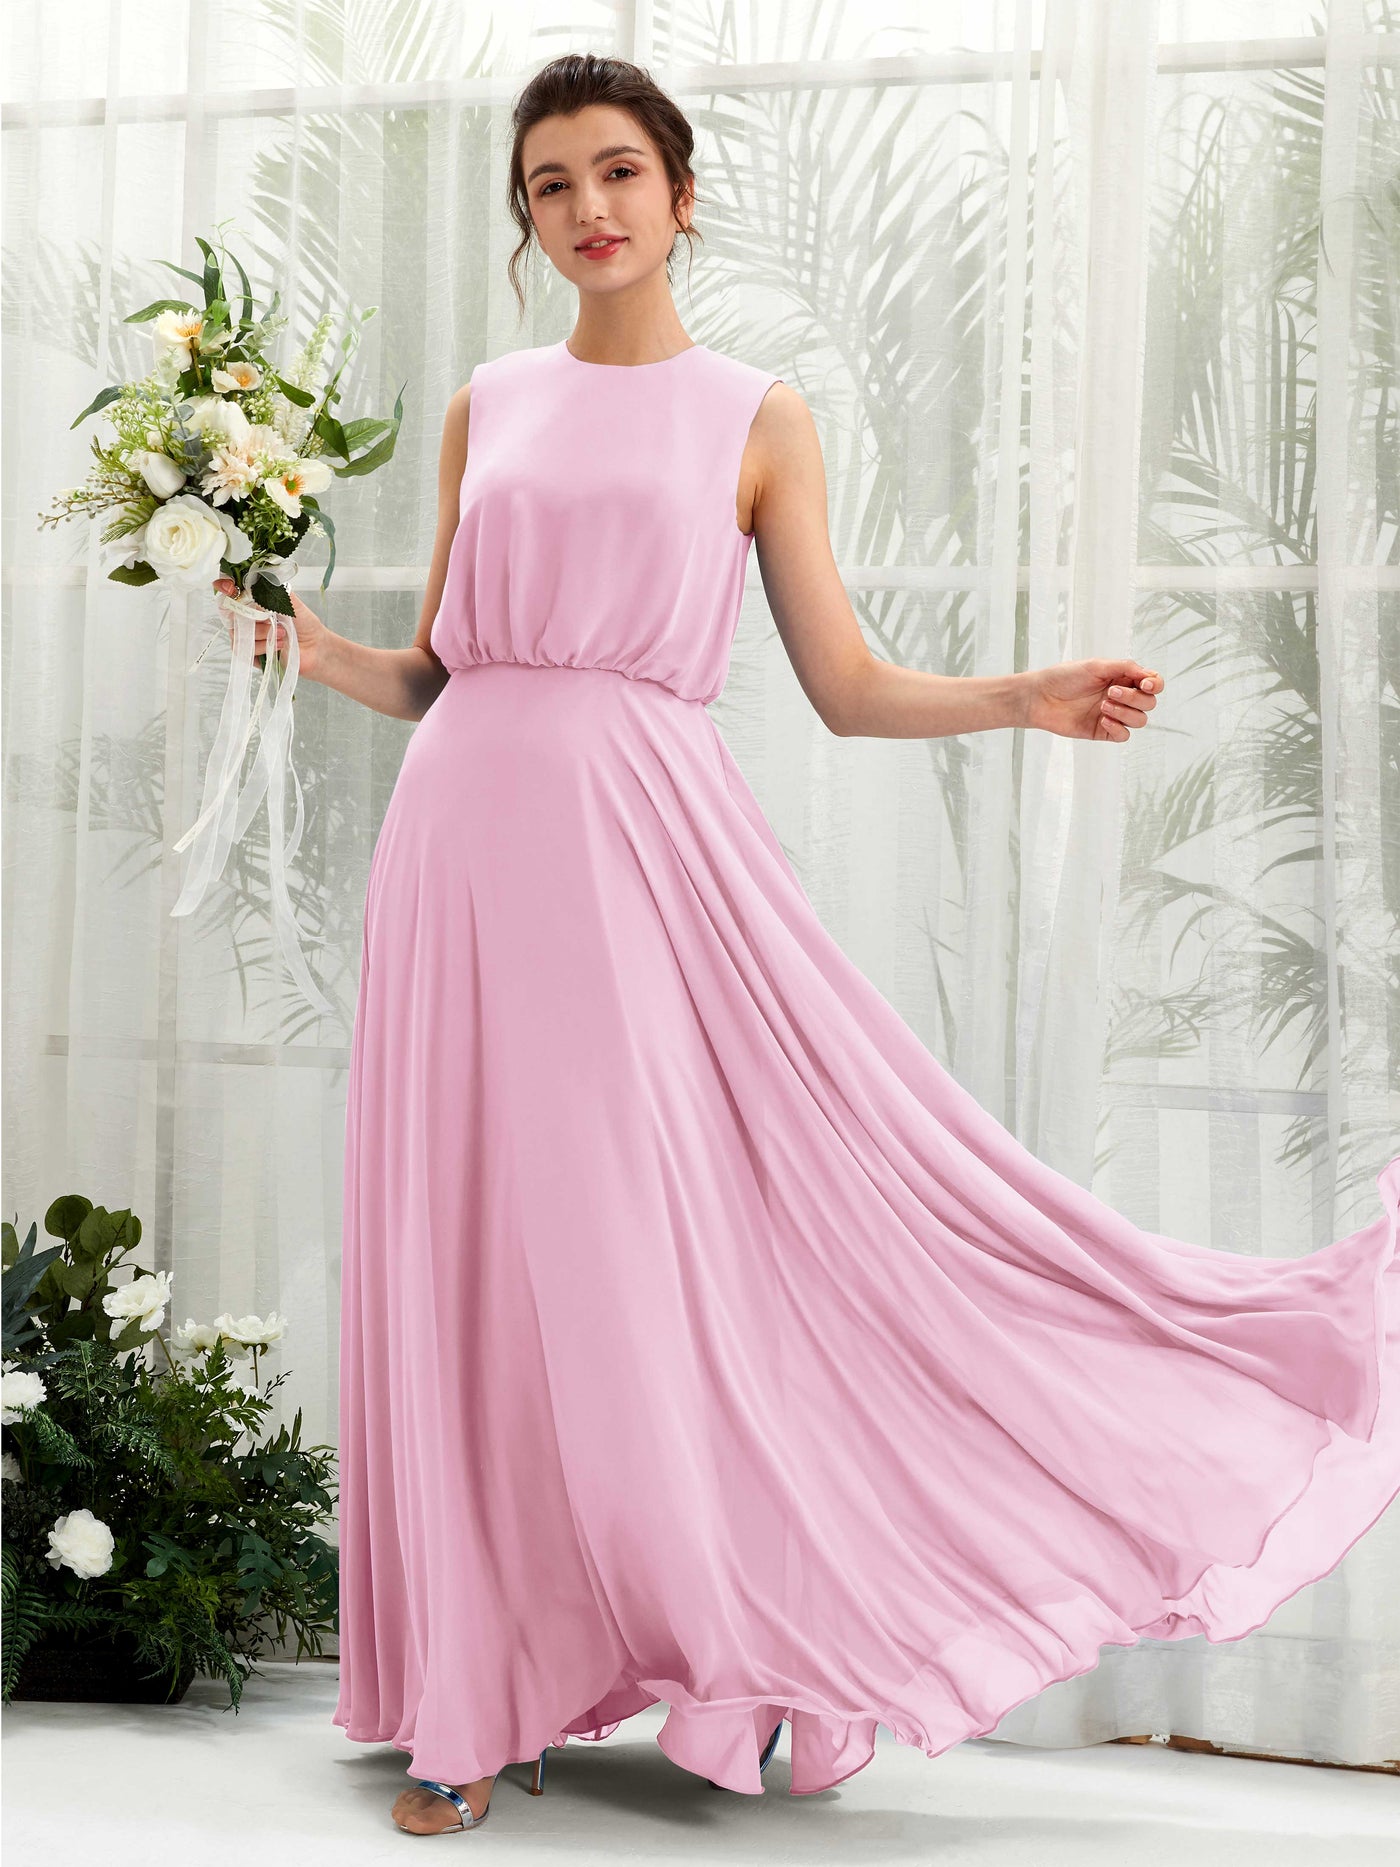 Candy Pink Bridesmaid Dresses Bridesmaid Dress A-line Chiffon Round Full Length Sleeveless Wedding Party Dress (81222839)#color_candy-pink